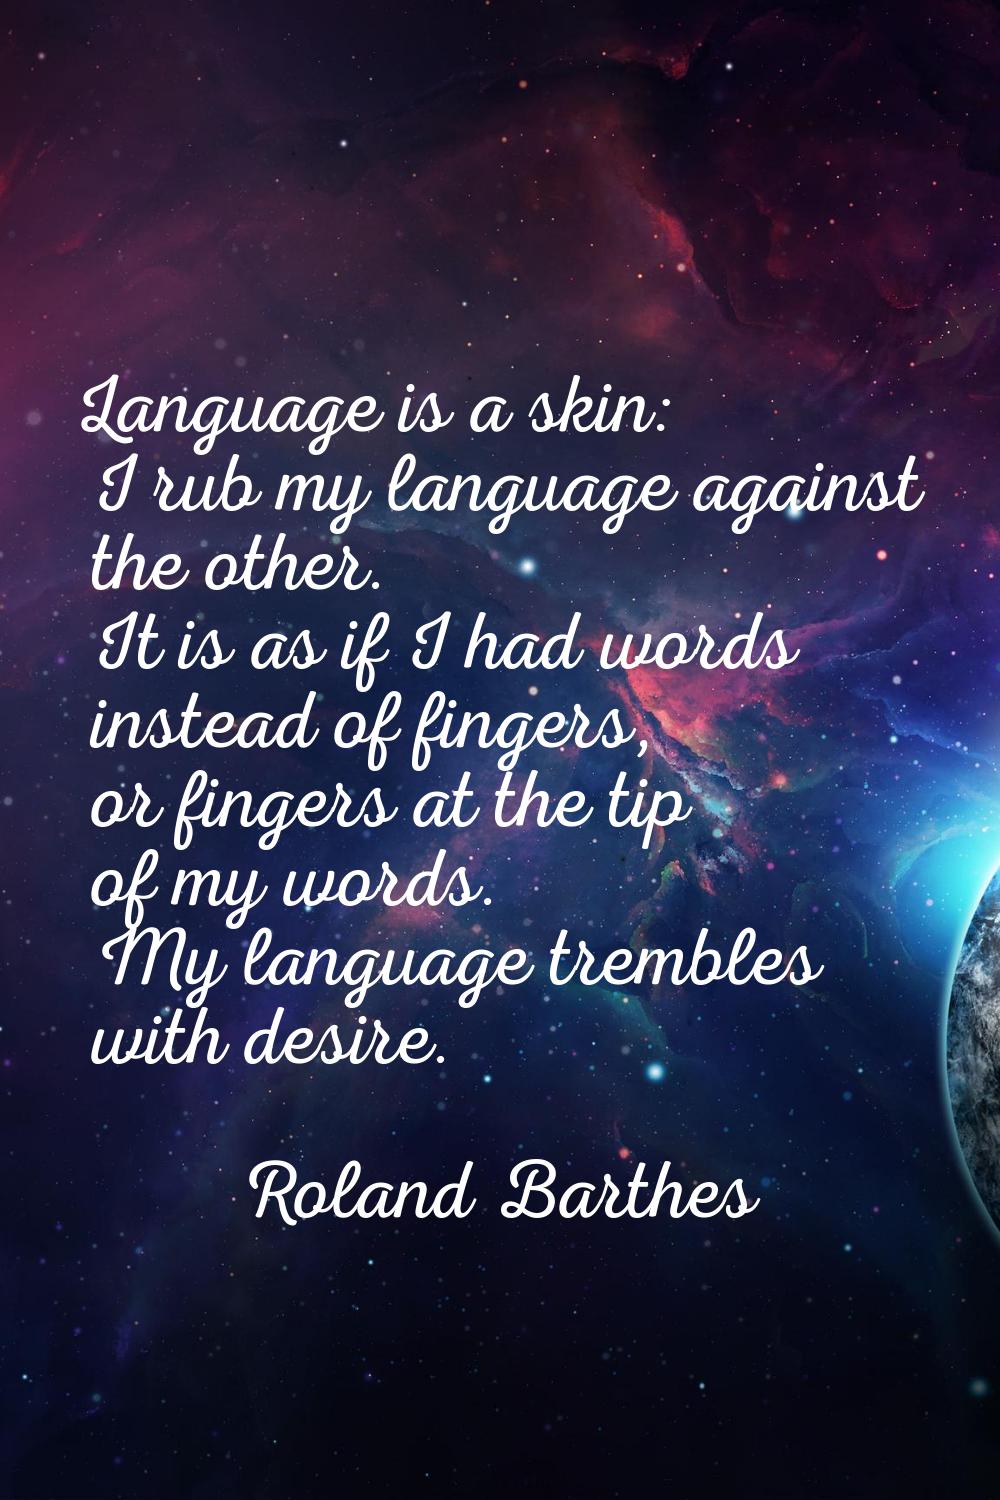 Language is a skin: I rub my language against the other. It is as if I had words instead of fingers